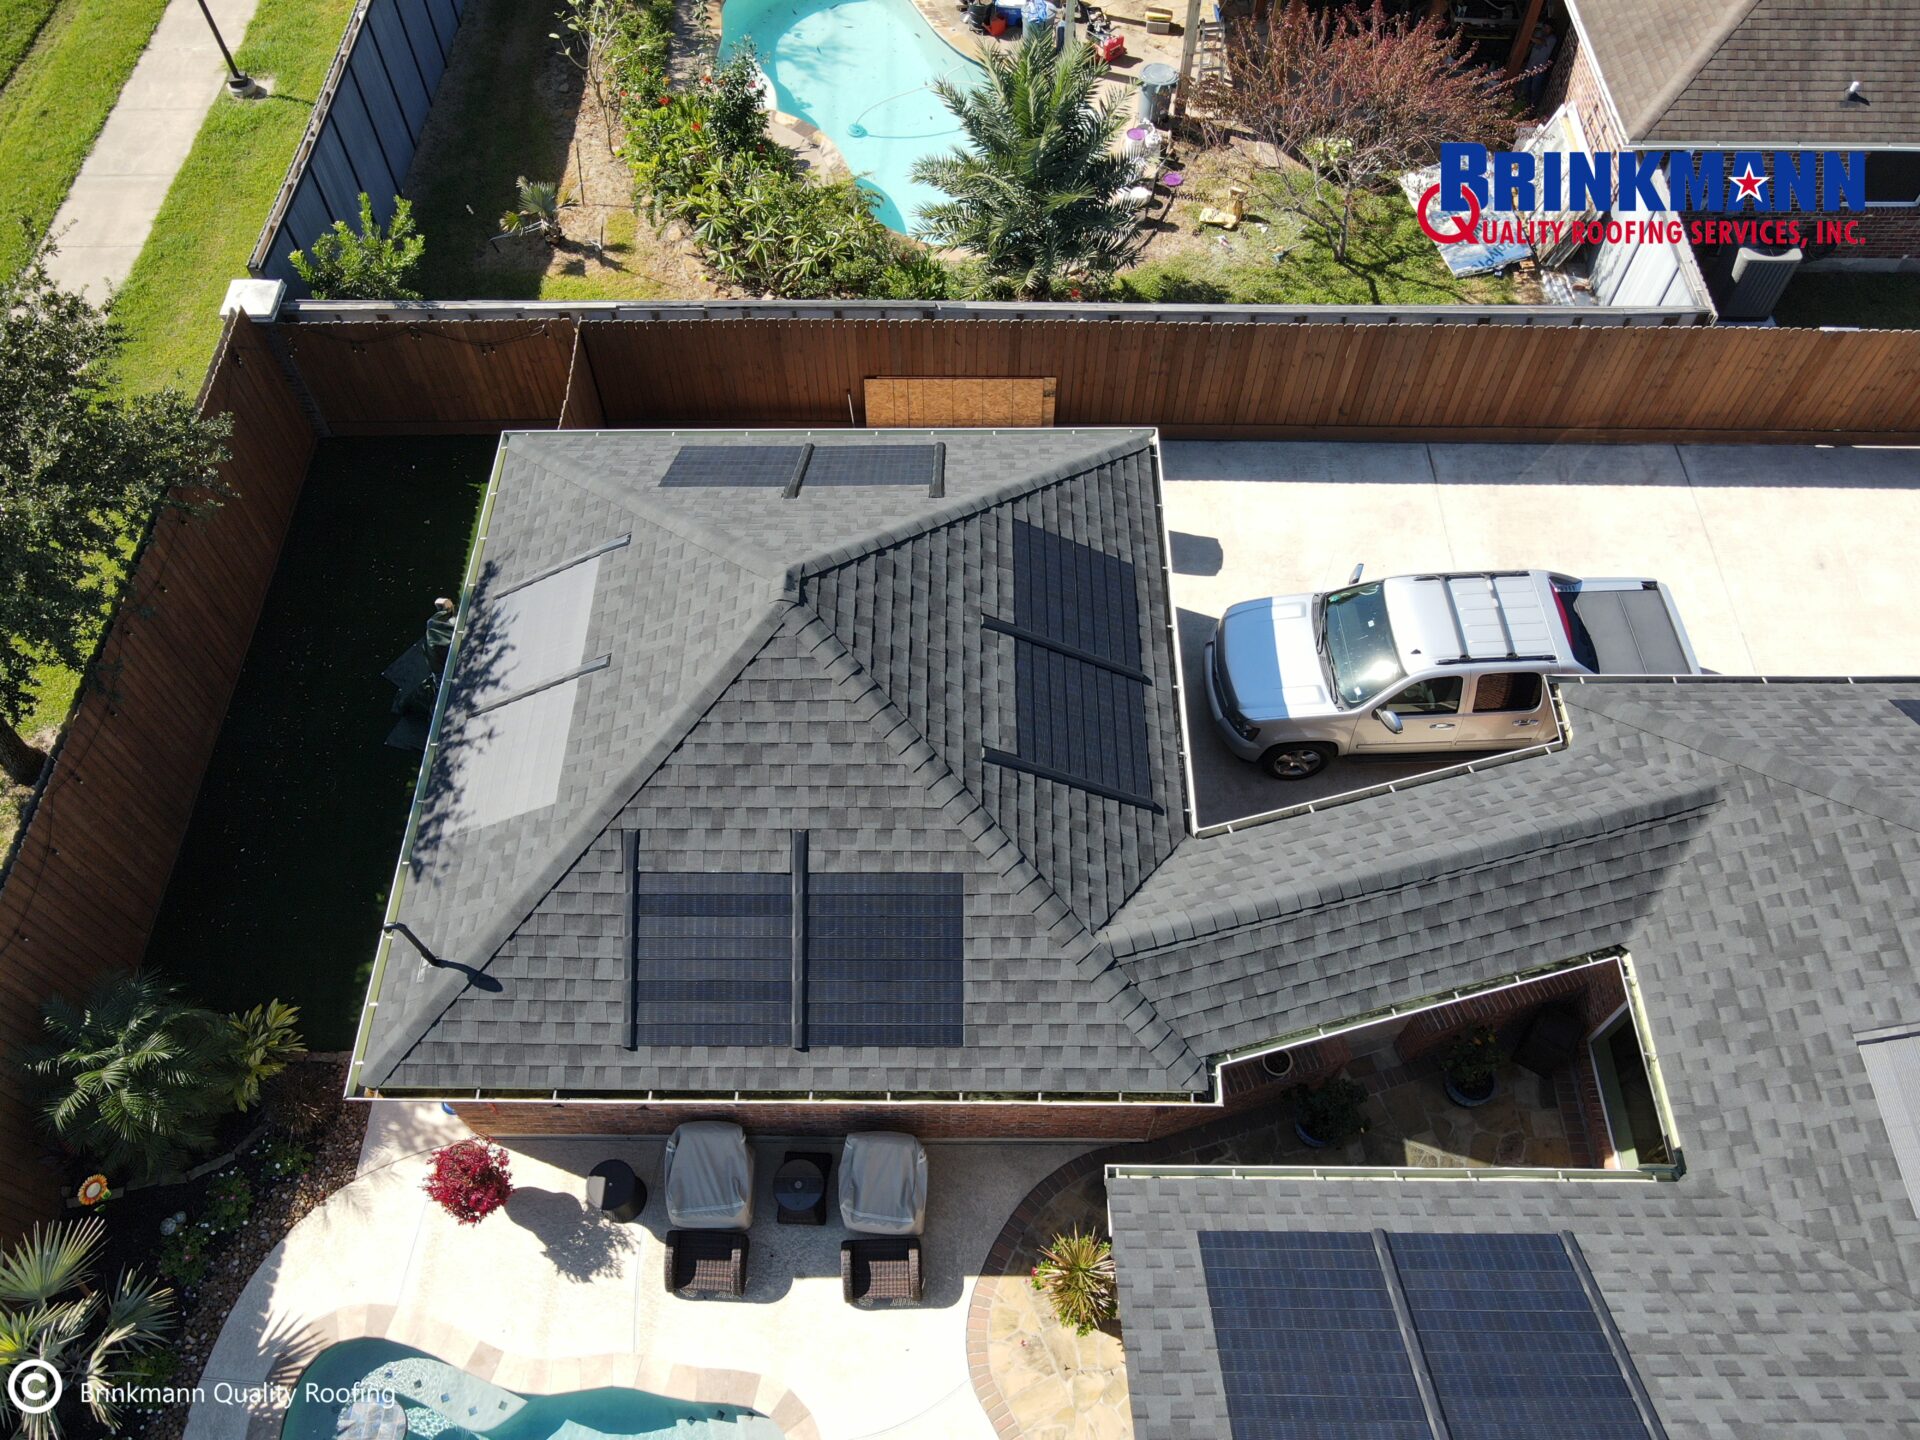 Solar roofing products installed in Mont Belvieu Texas